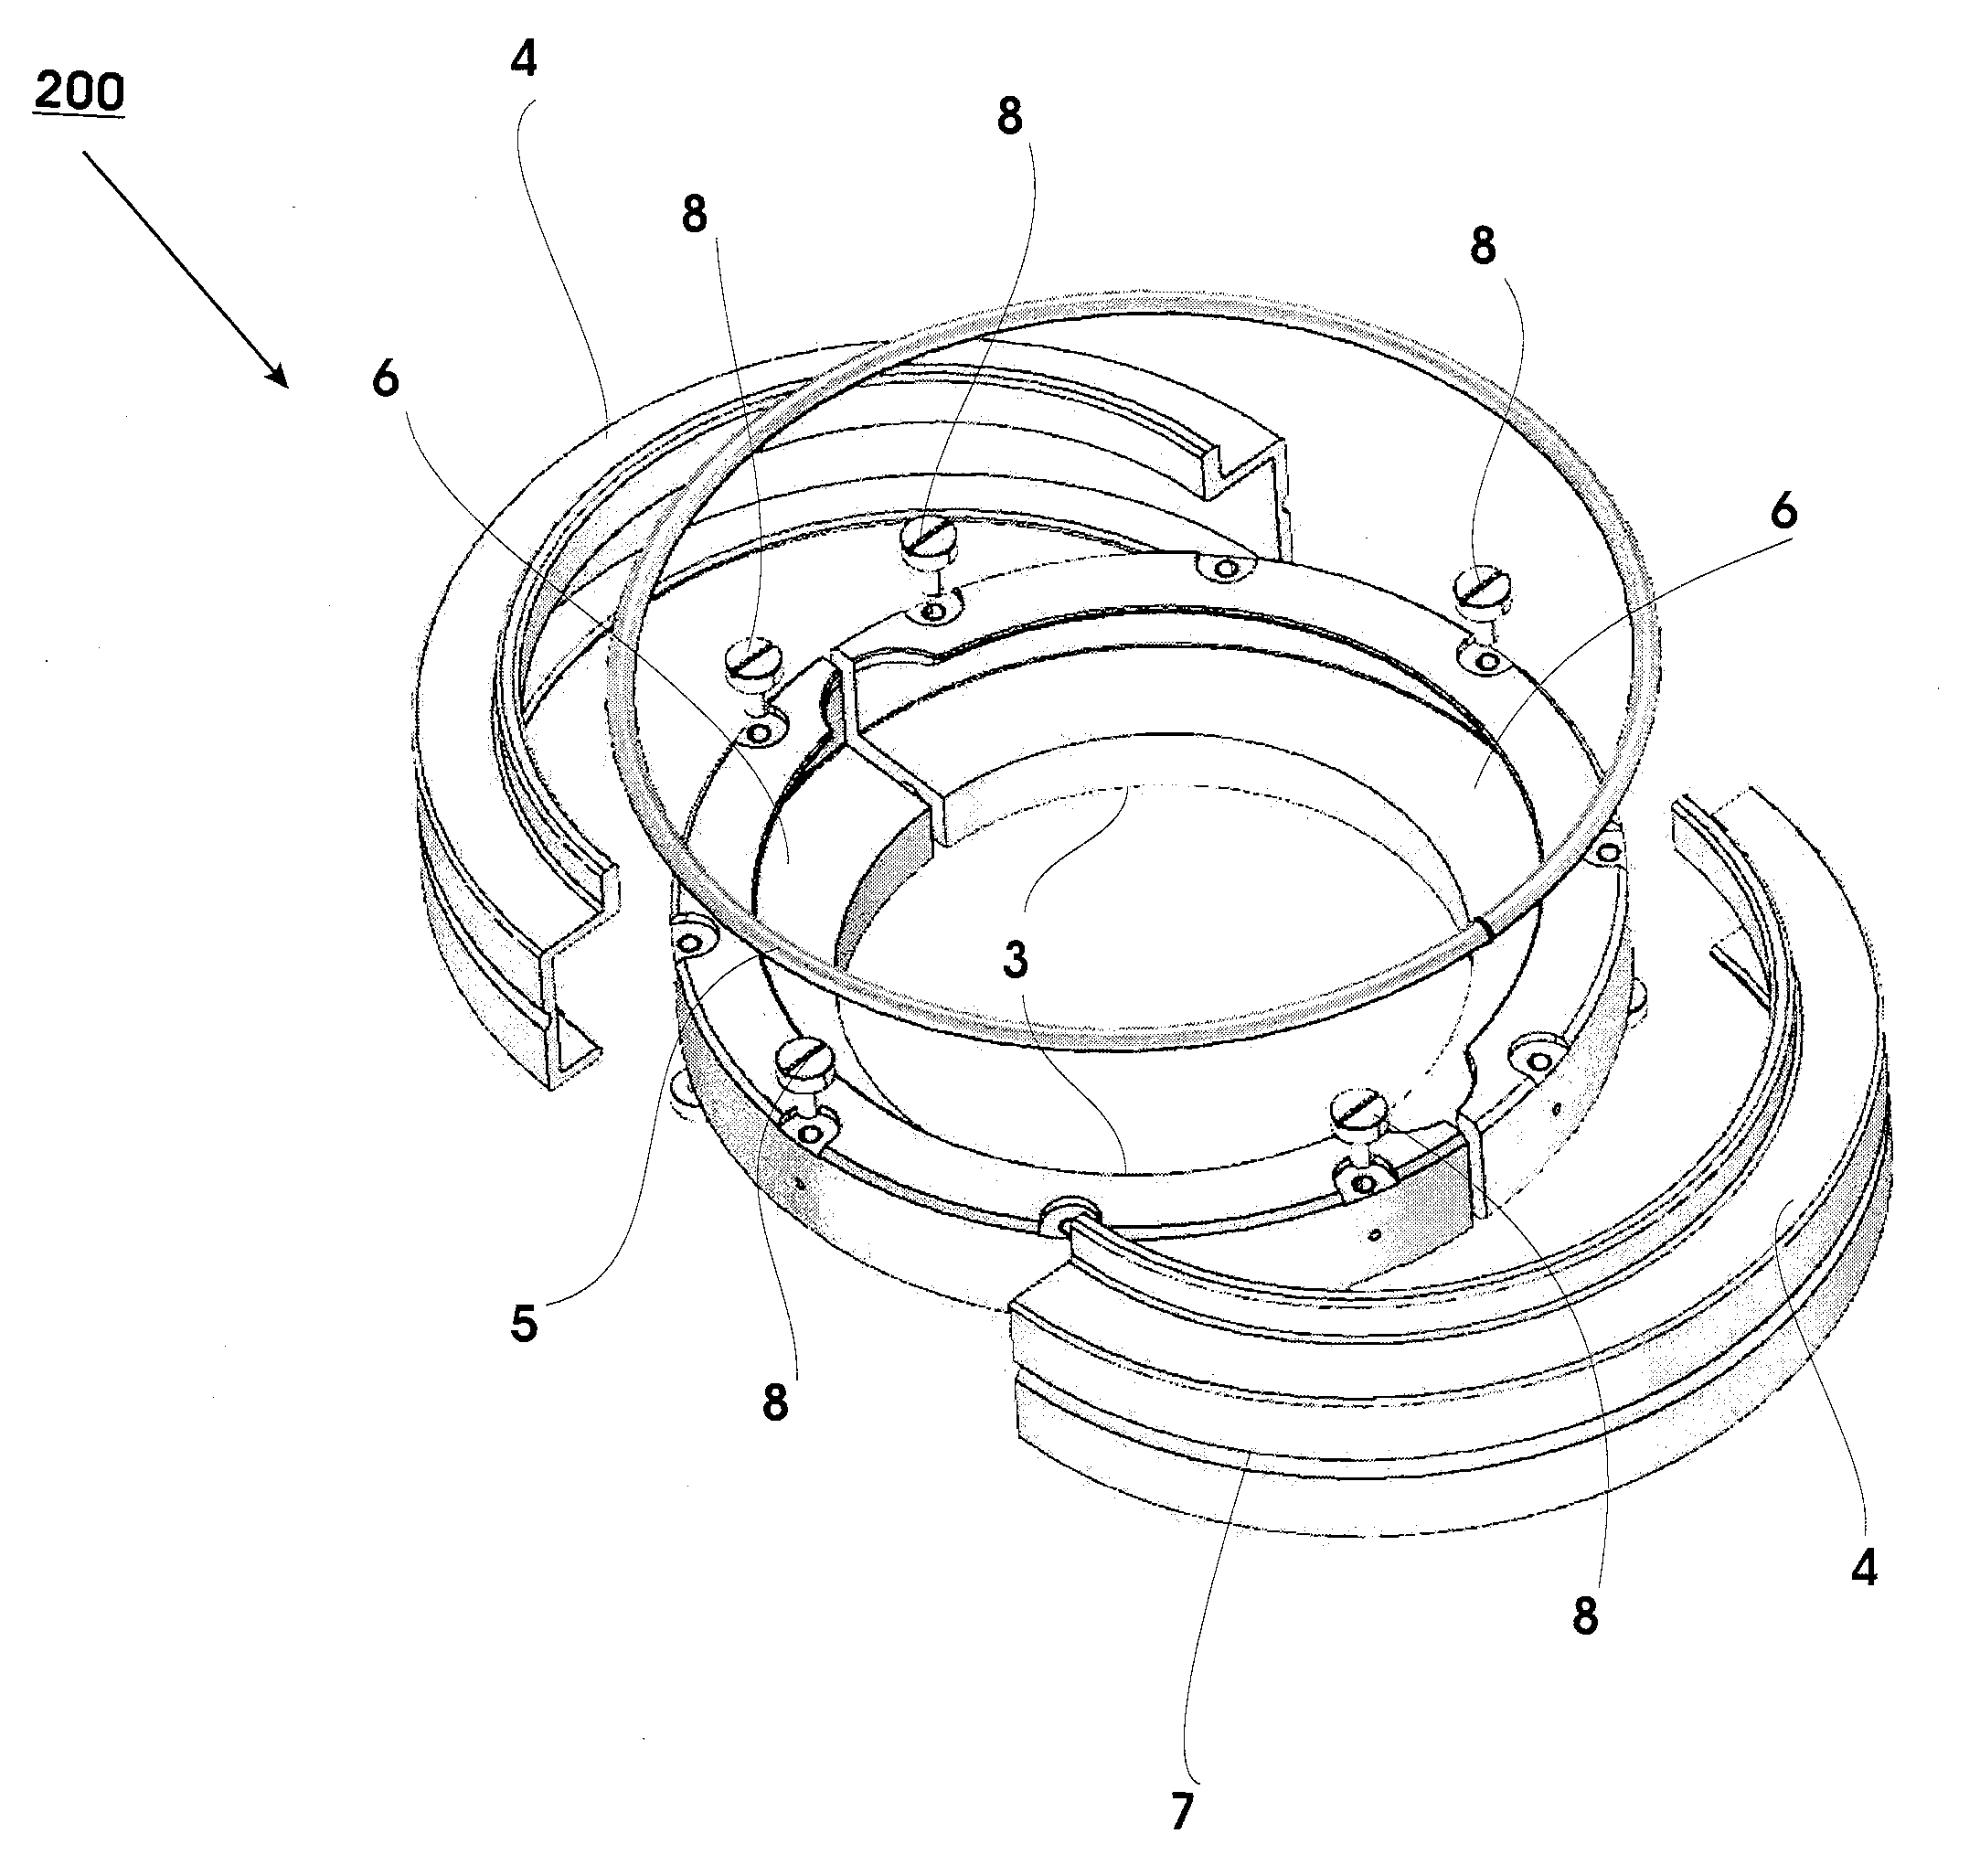 Device for supporting a rotatable target and sputtering apparatus